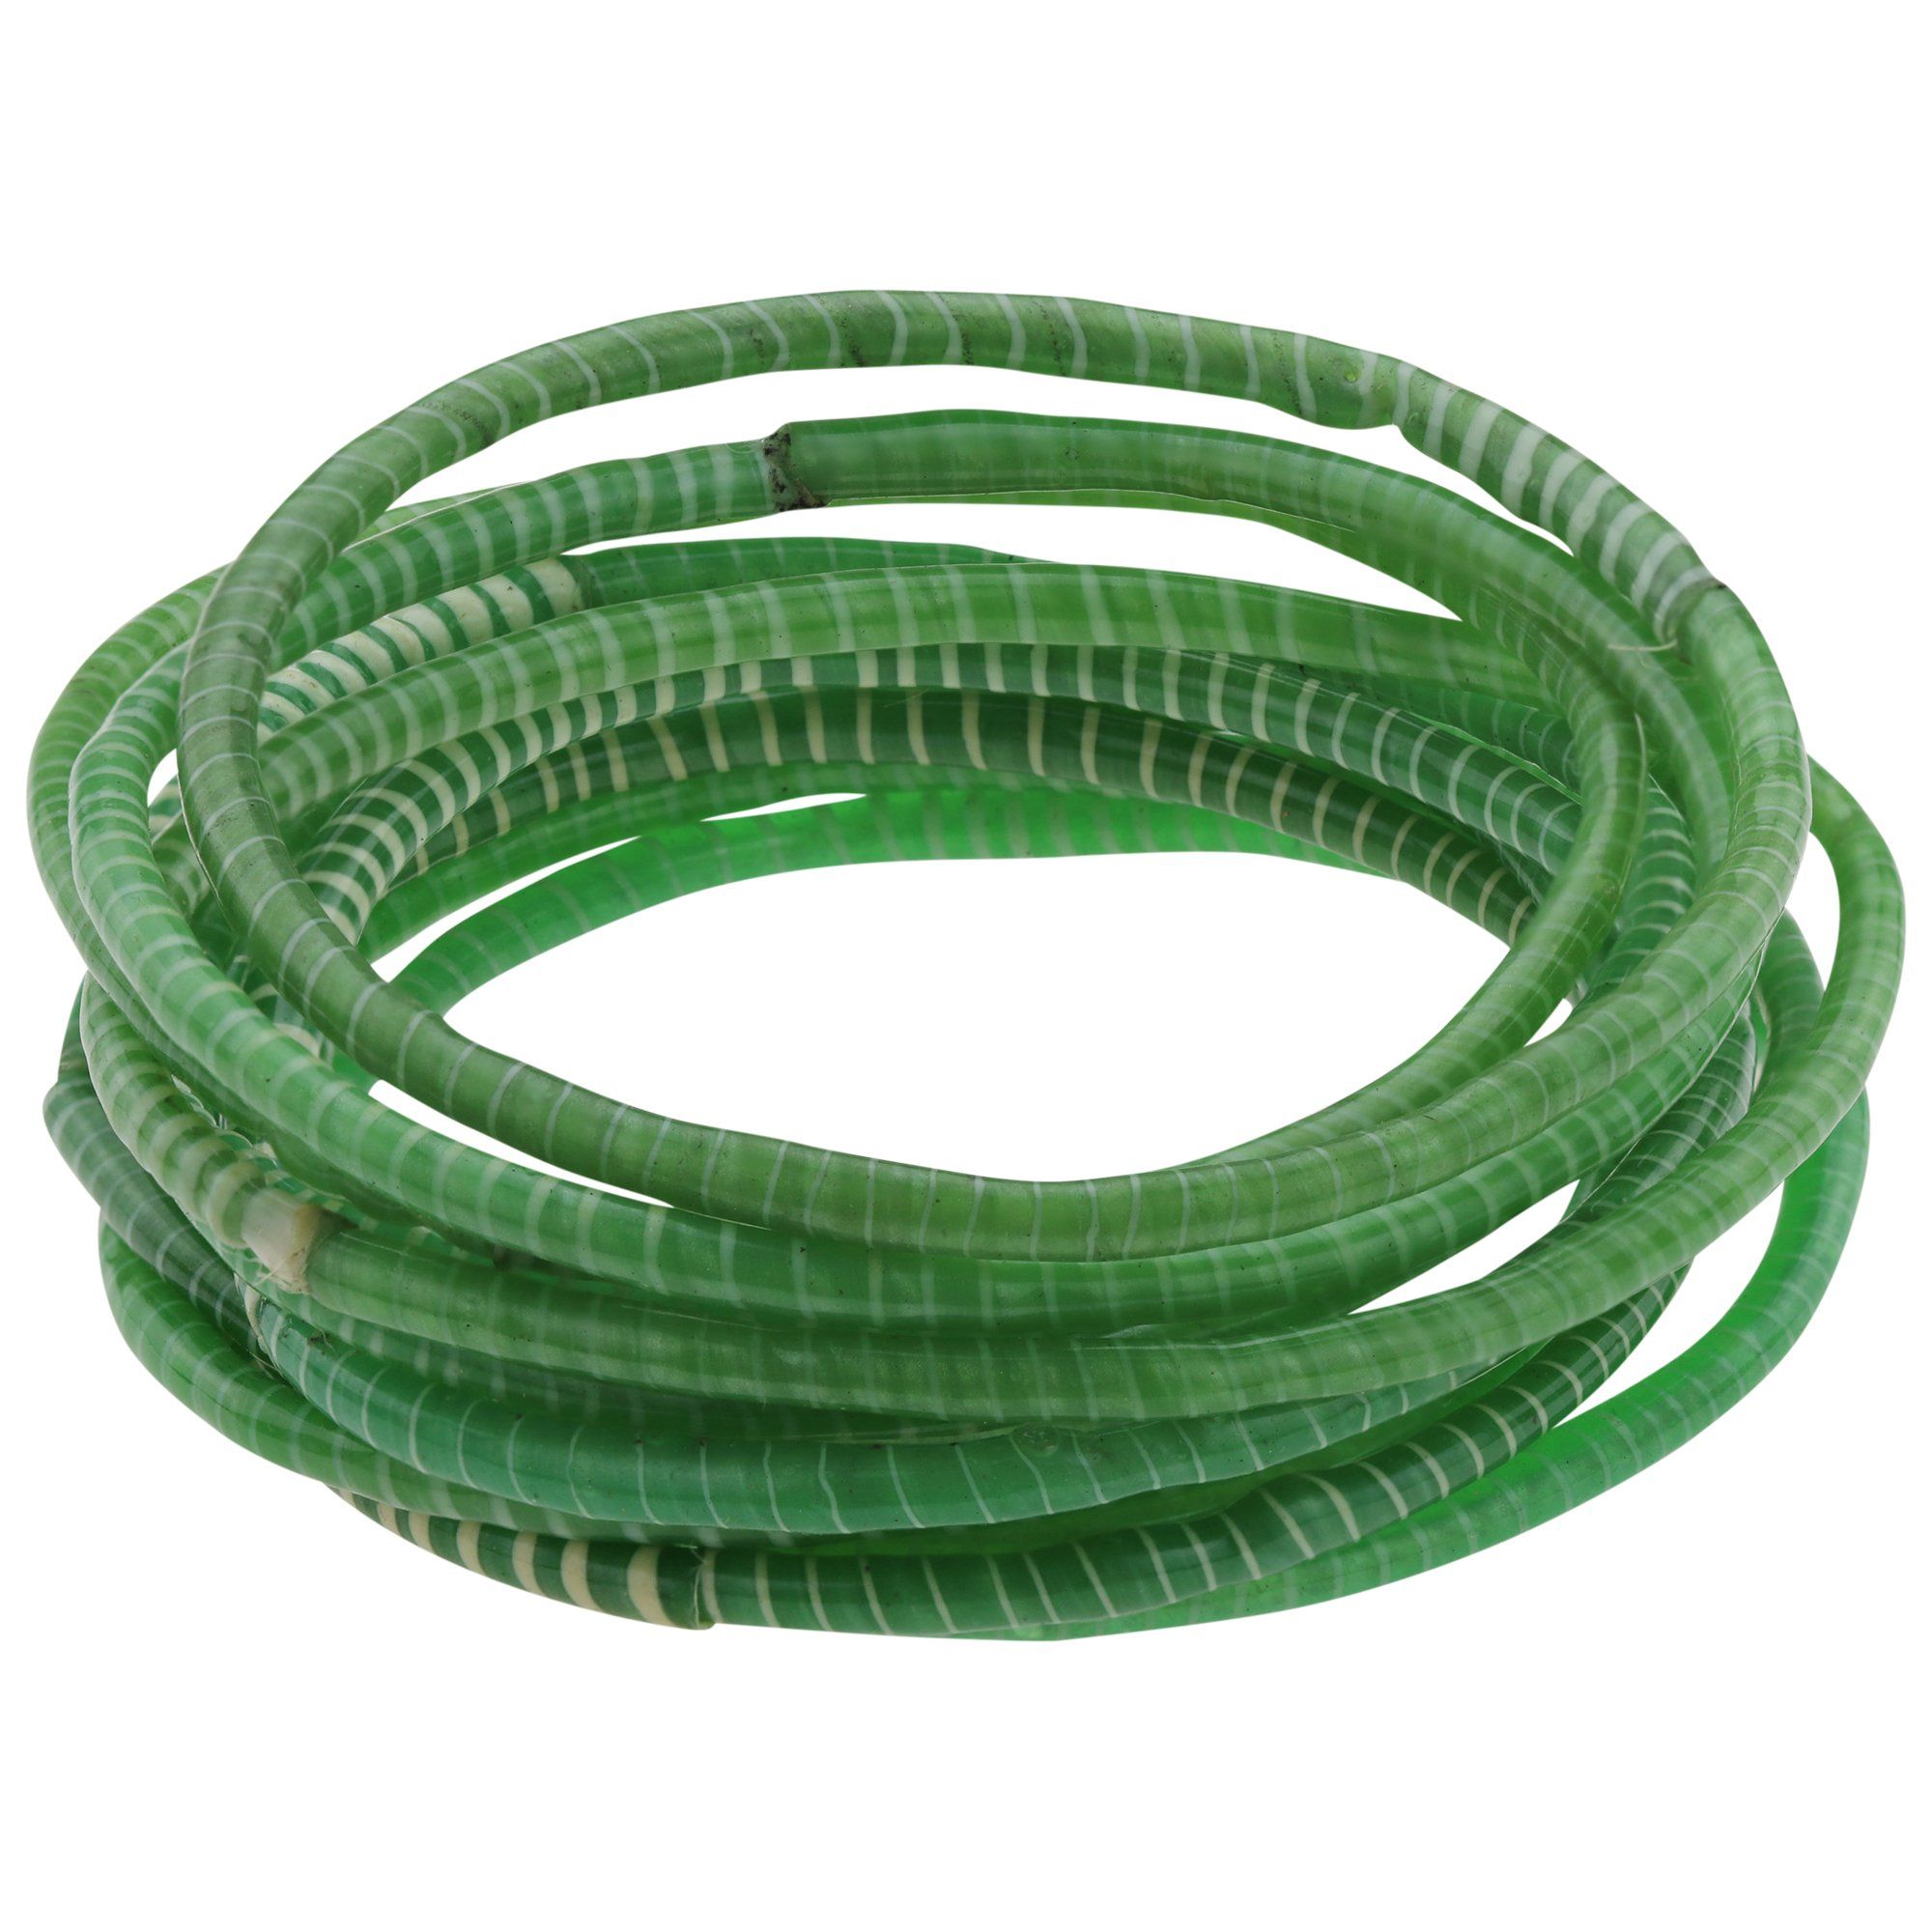 Colors Of Mali Recycled Bracelet - Green